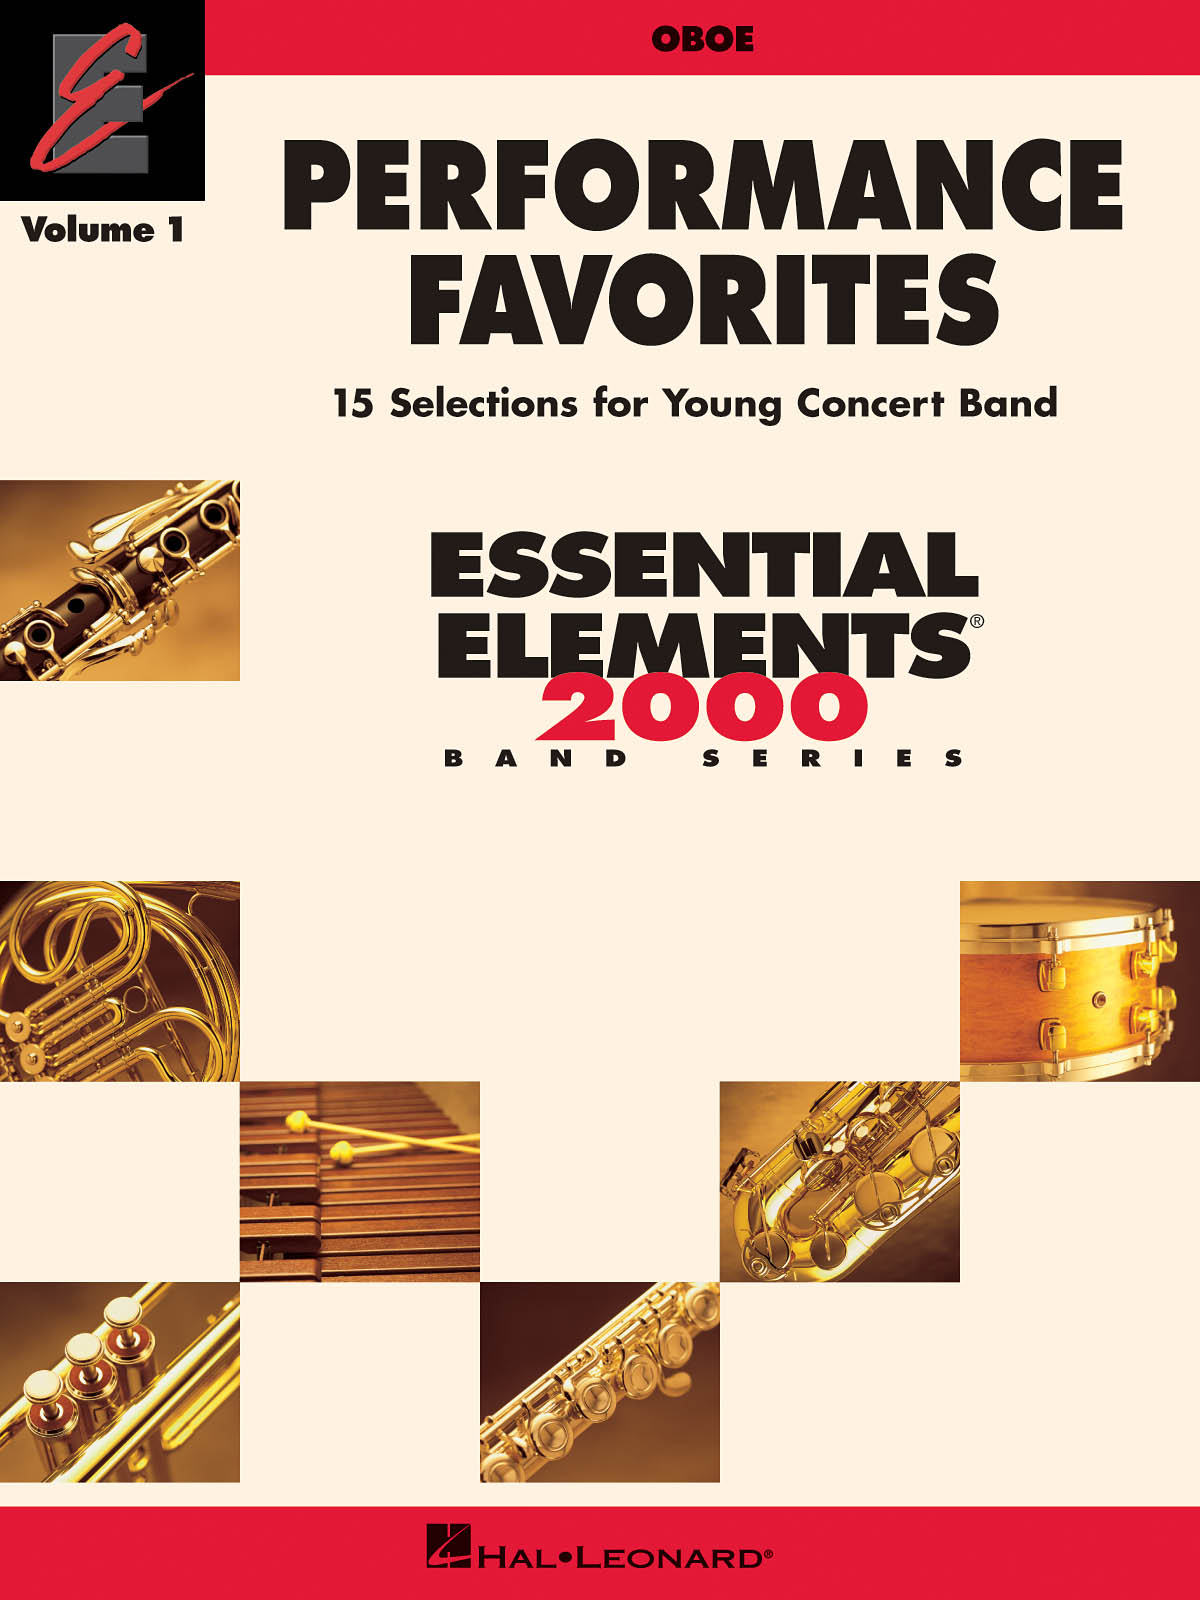 Performance Favorites Vol. 1 - Oboe - 15 Selections for Young Concert Band - noty na hoboj